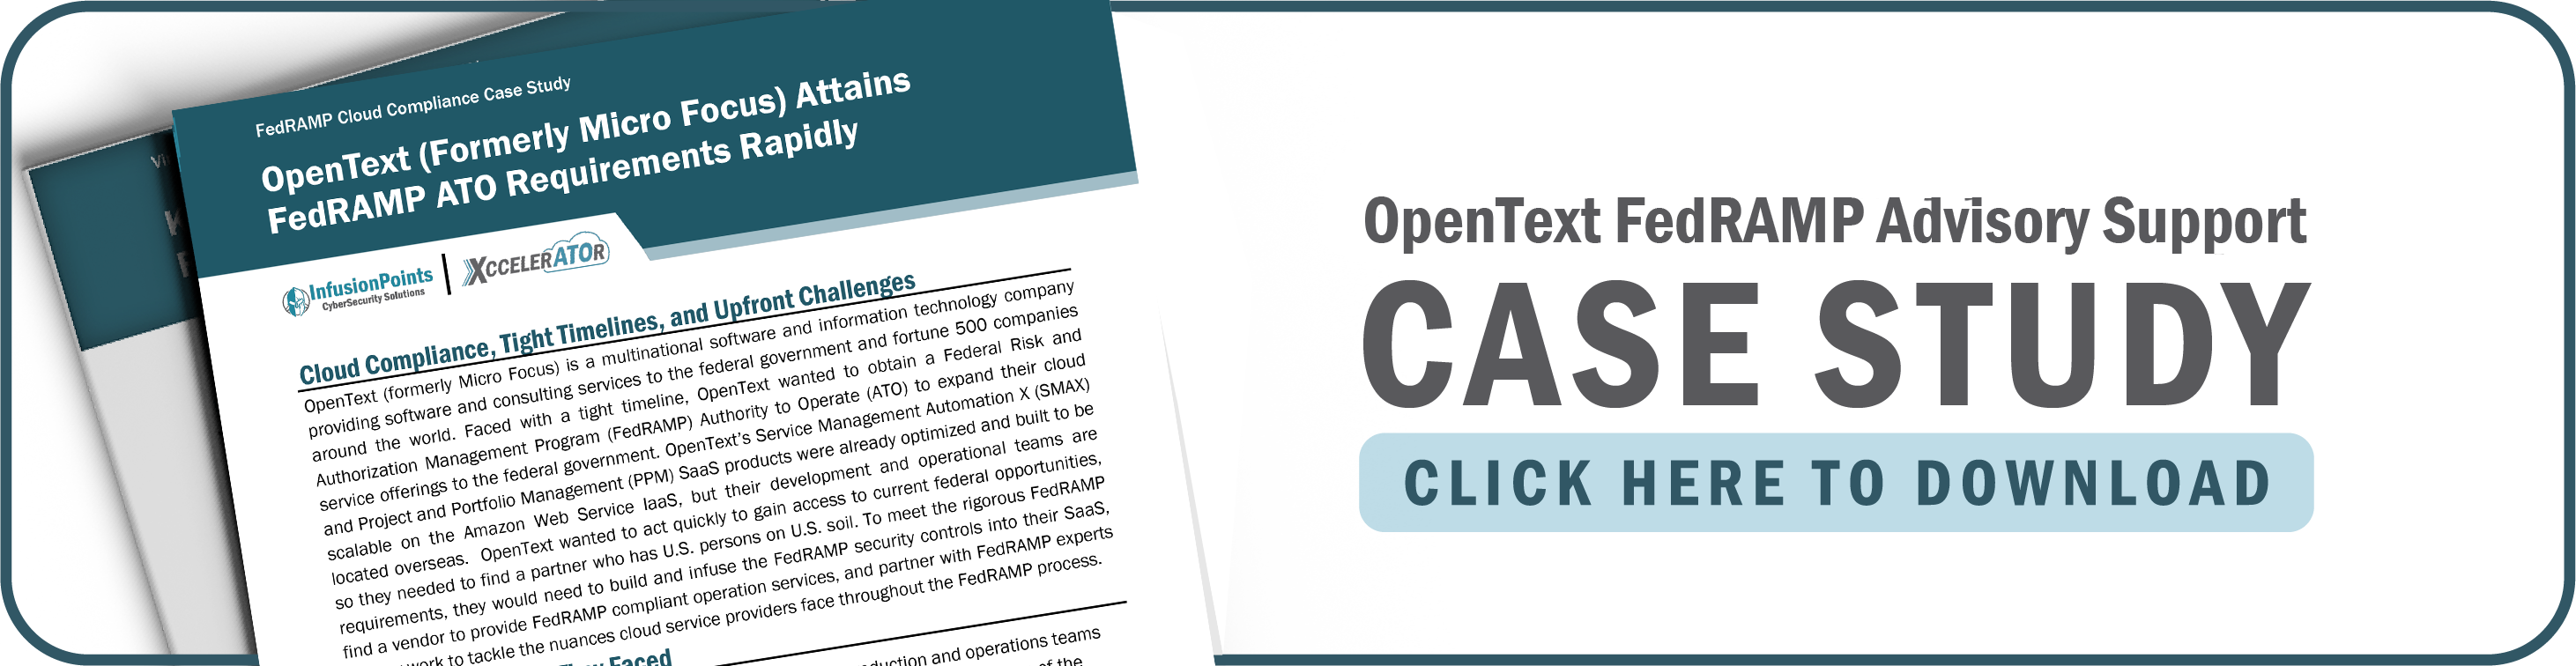 Click here to download OpenText Case Study